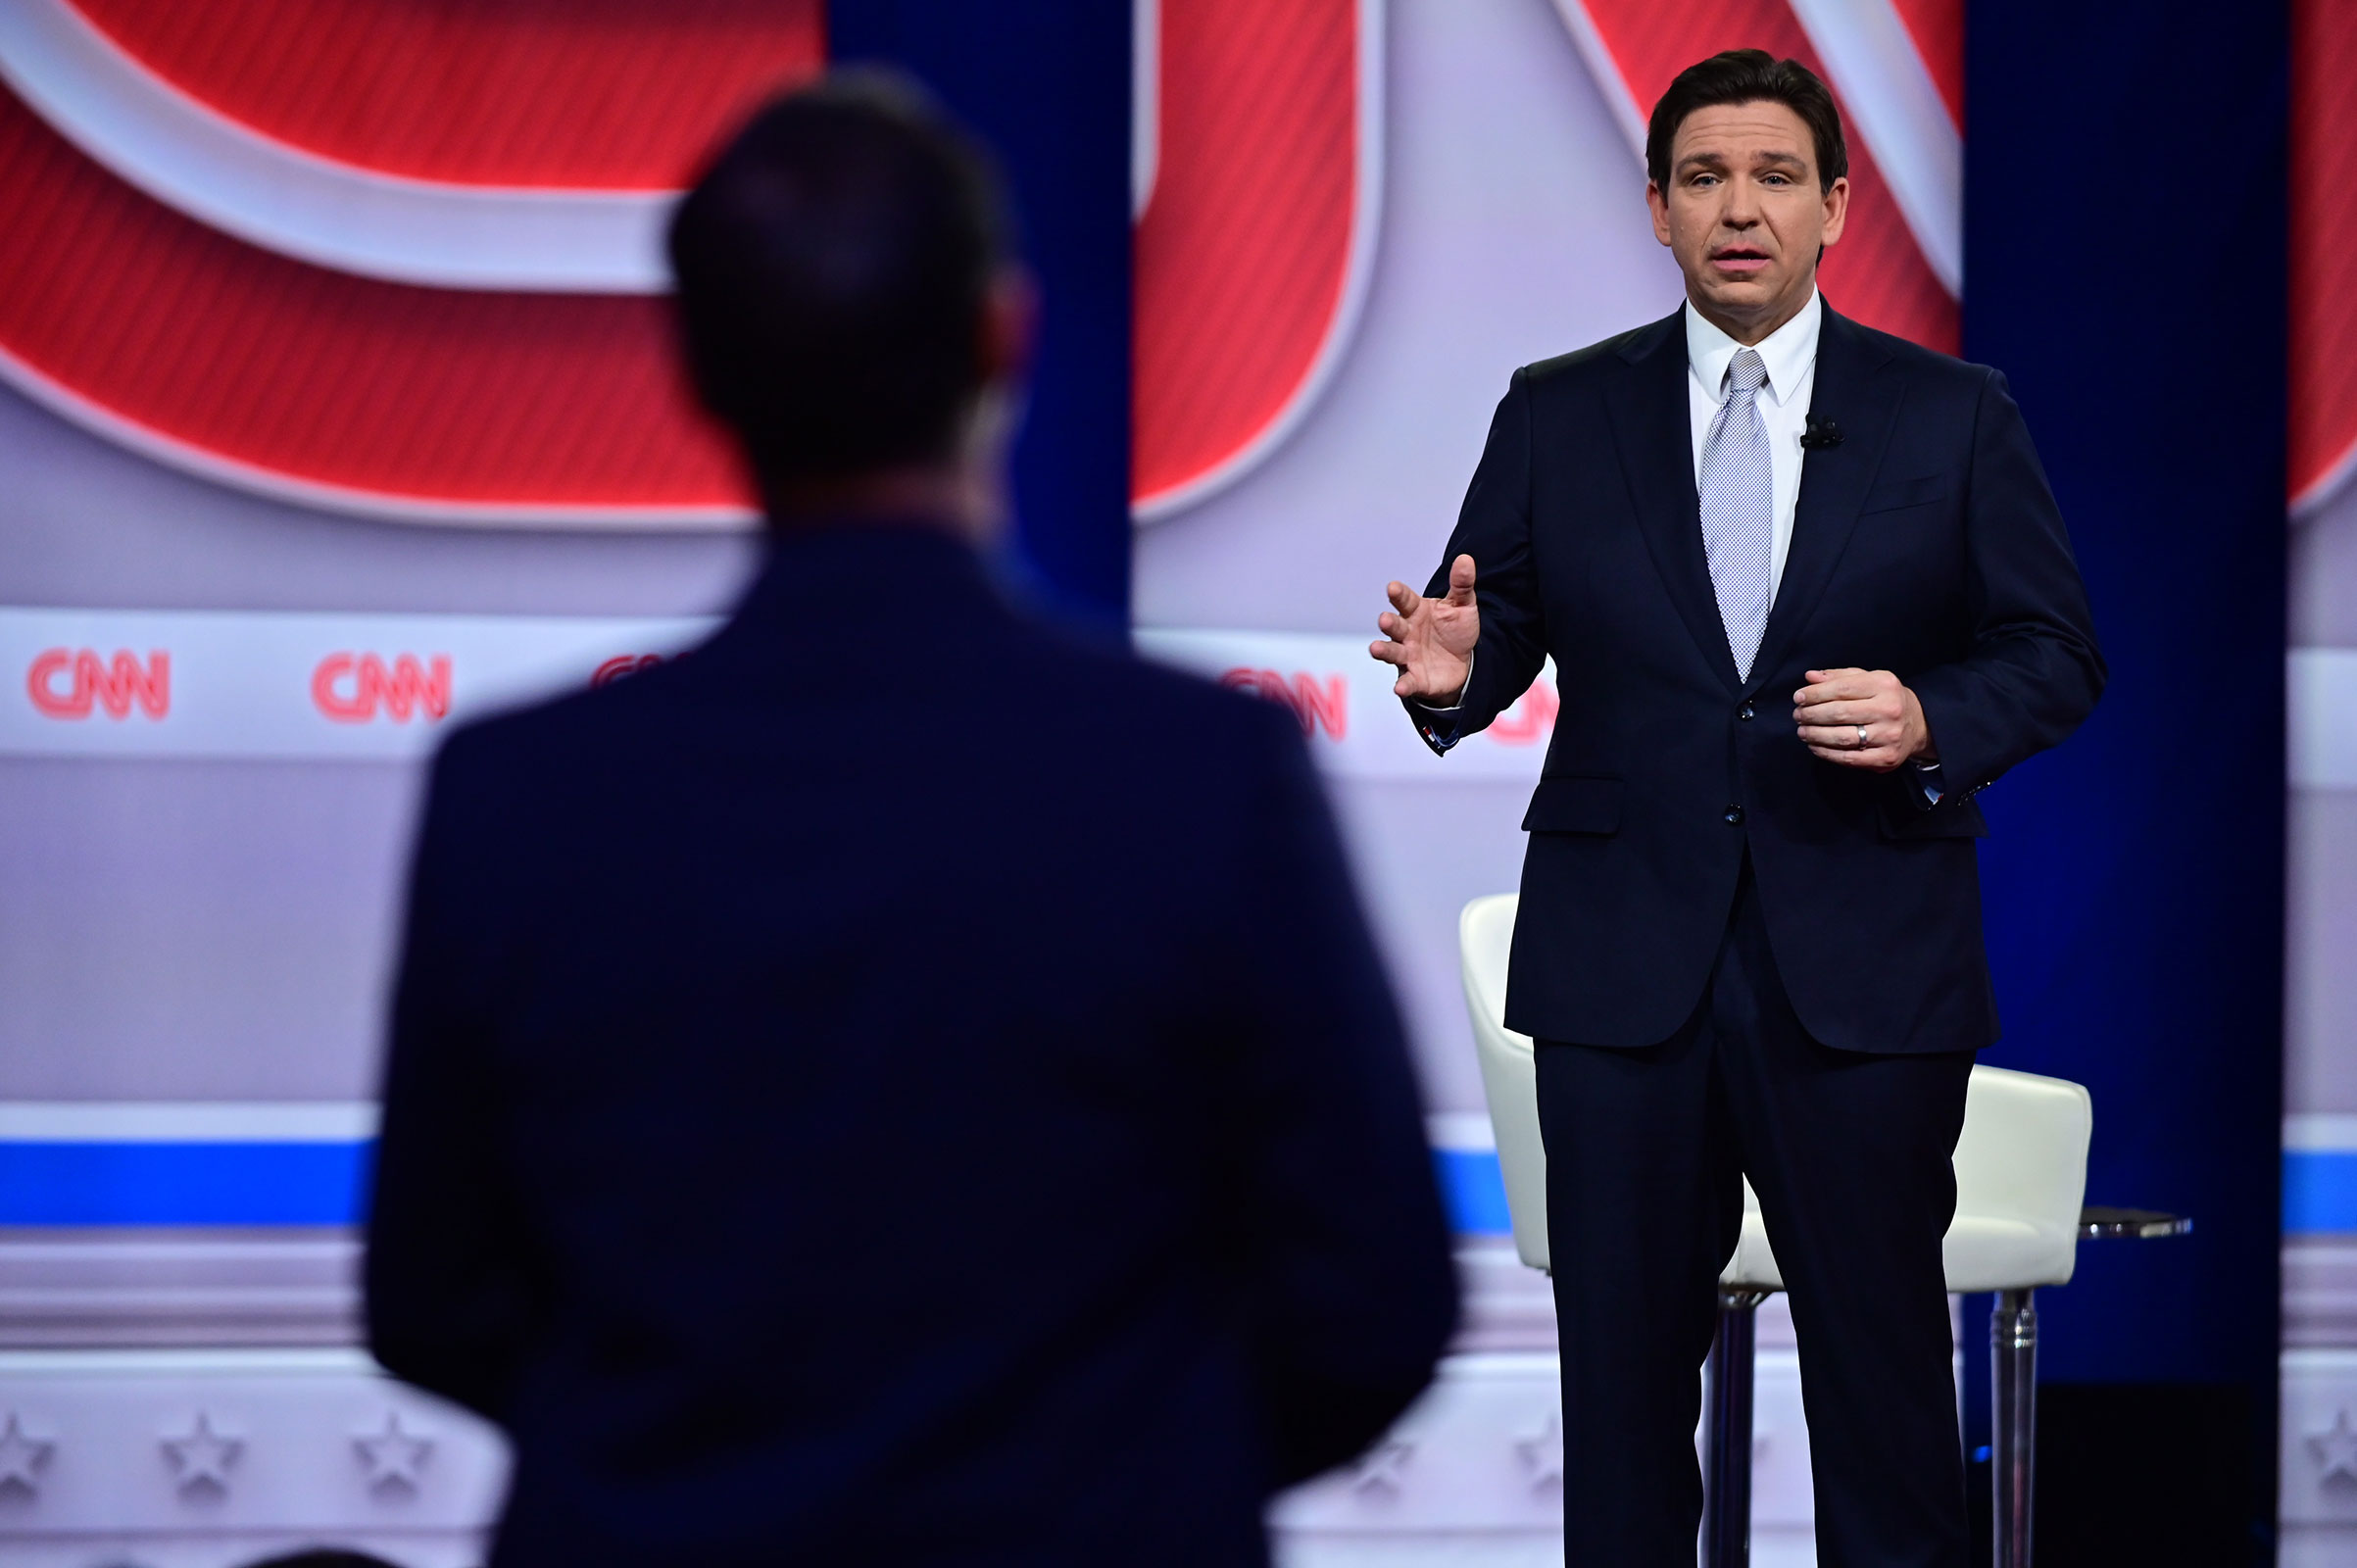 Florida Gov. Ron DeSantis participates in a CNN Republican Presidential Town Hall moderated by CNN’s Wolf Blitzer at New England College in Henniker, New Hampshire, on January 16, 2024.